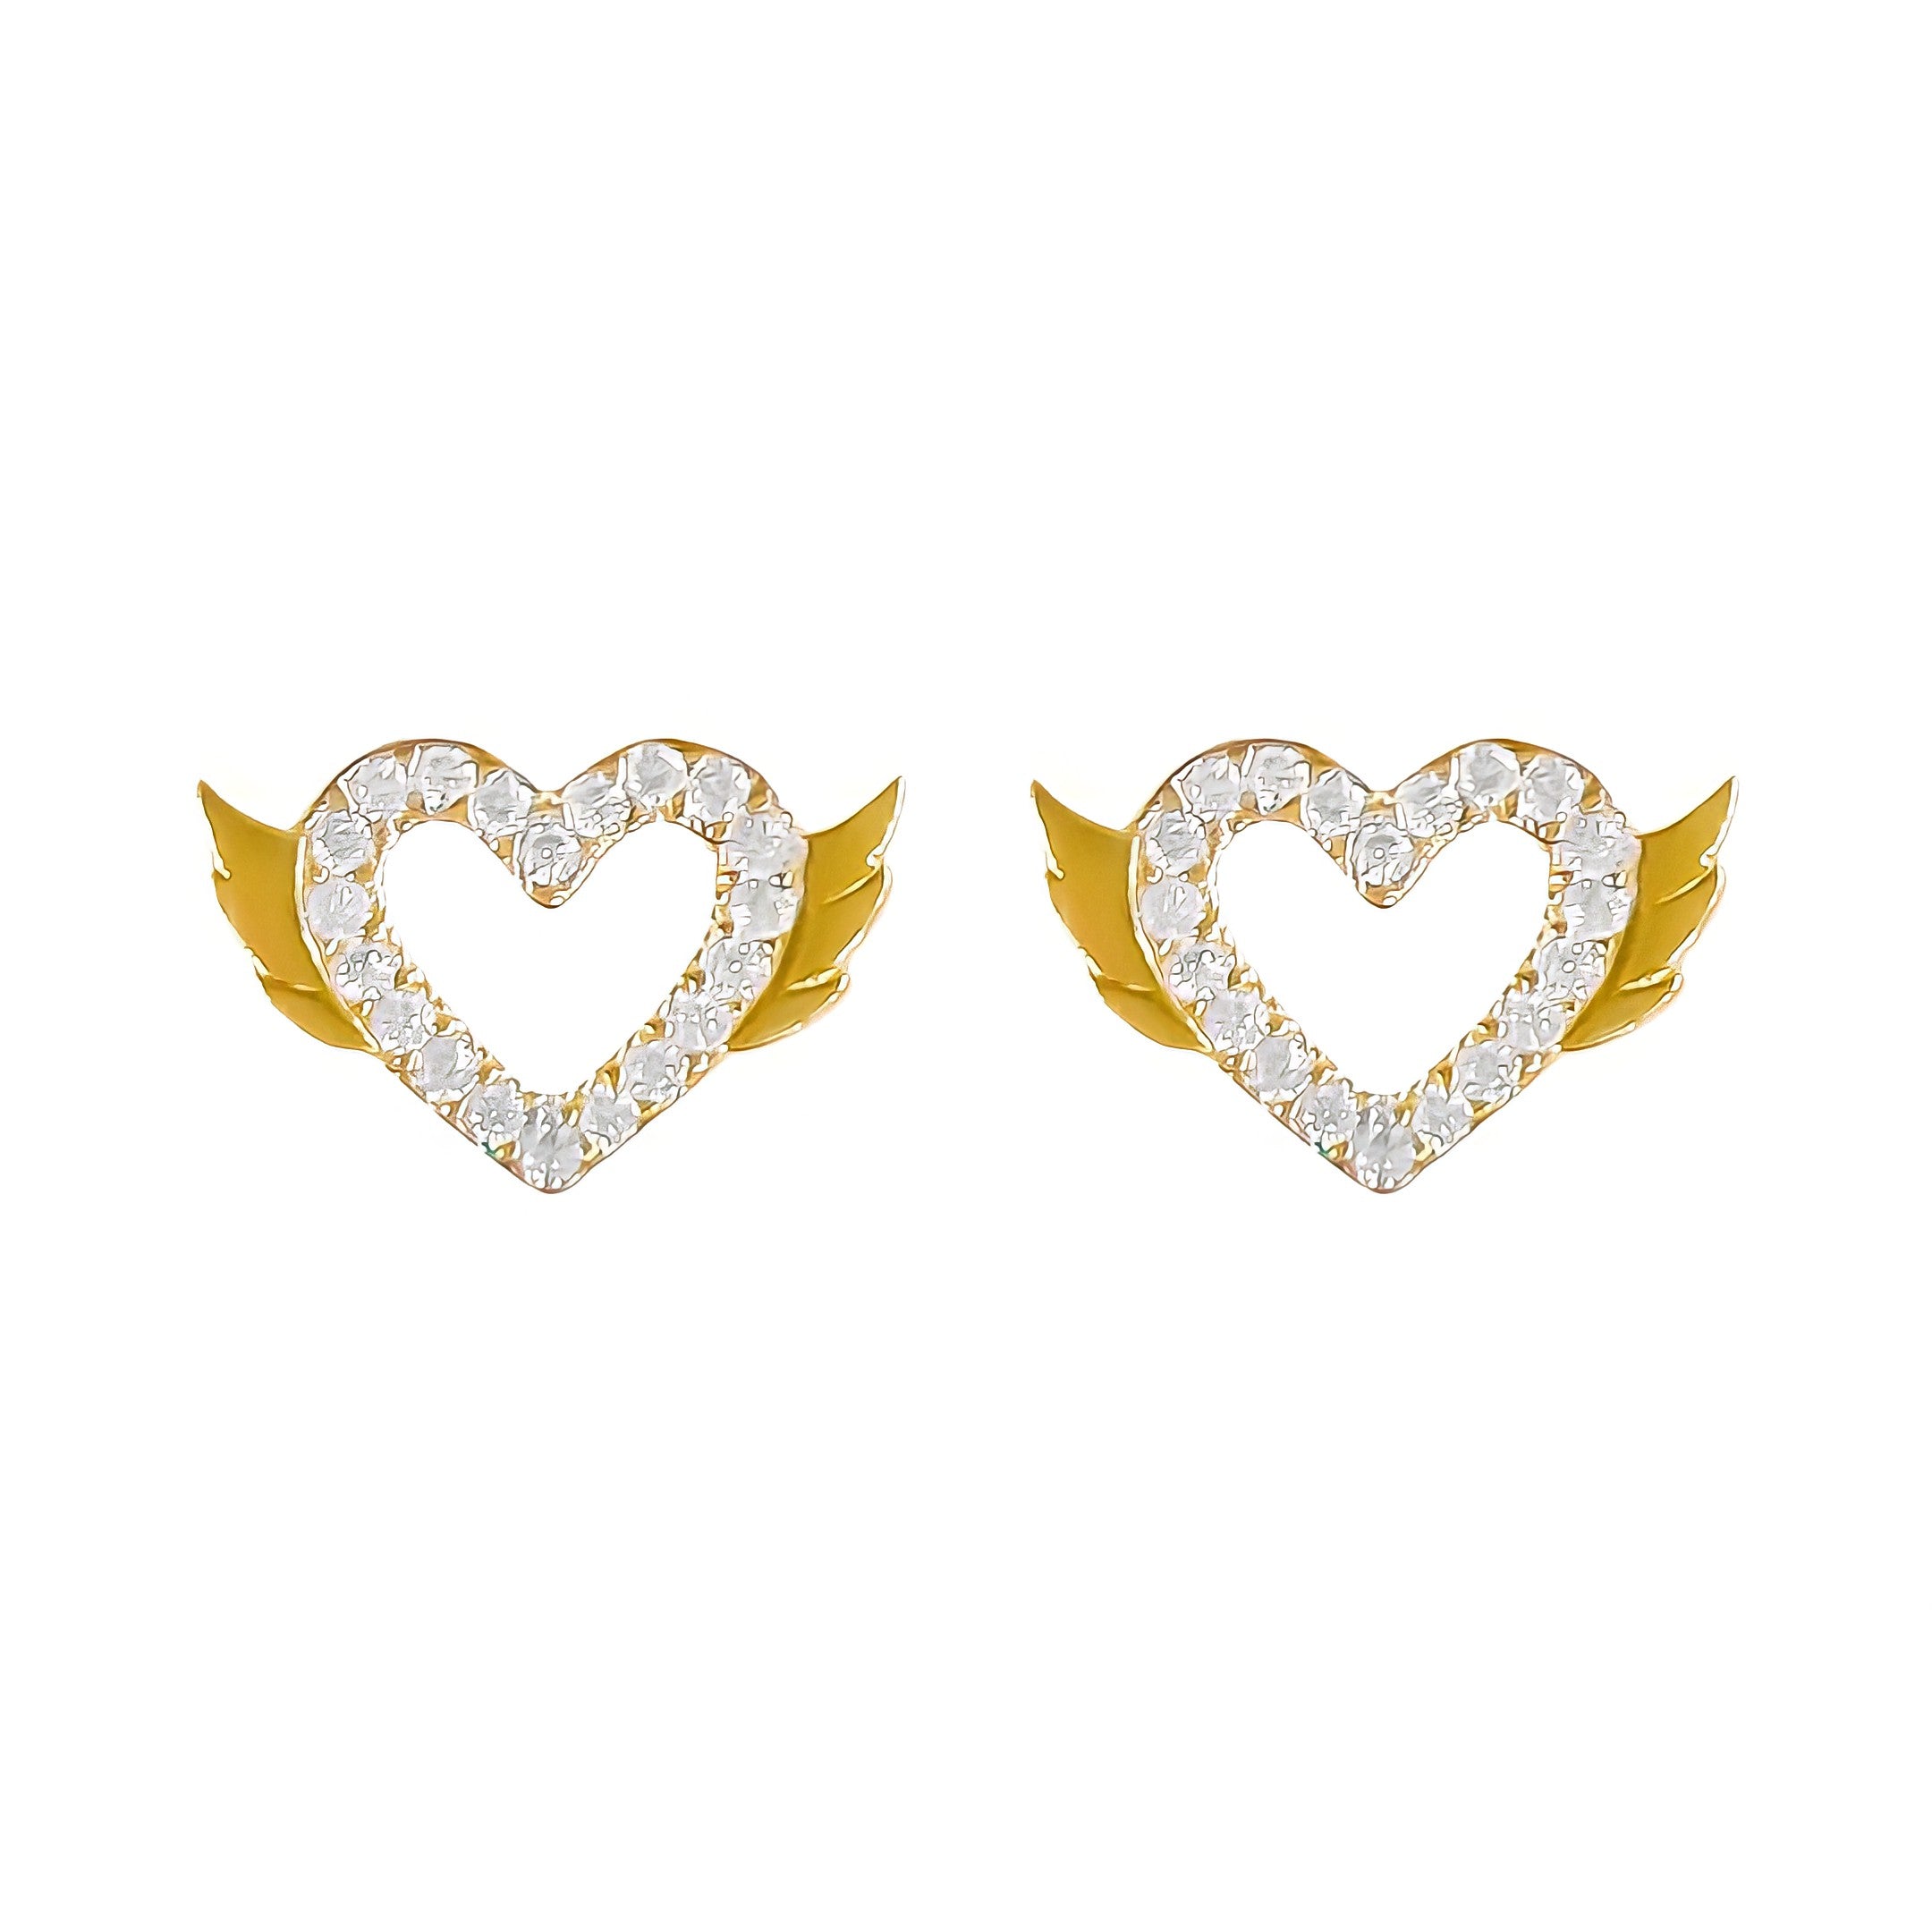 14K YELLOW GOLD PAVE HEART WITH WINGS STUD EARRINGS